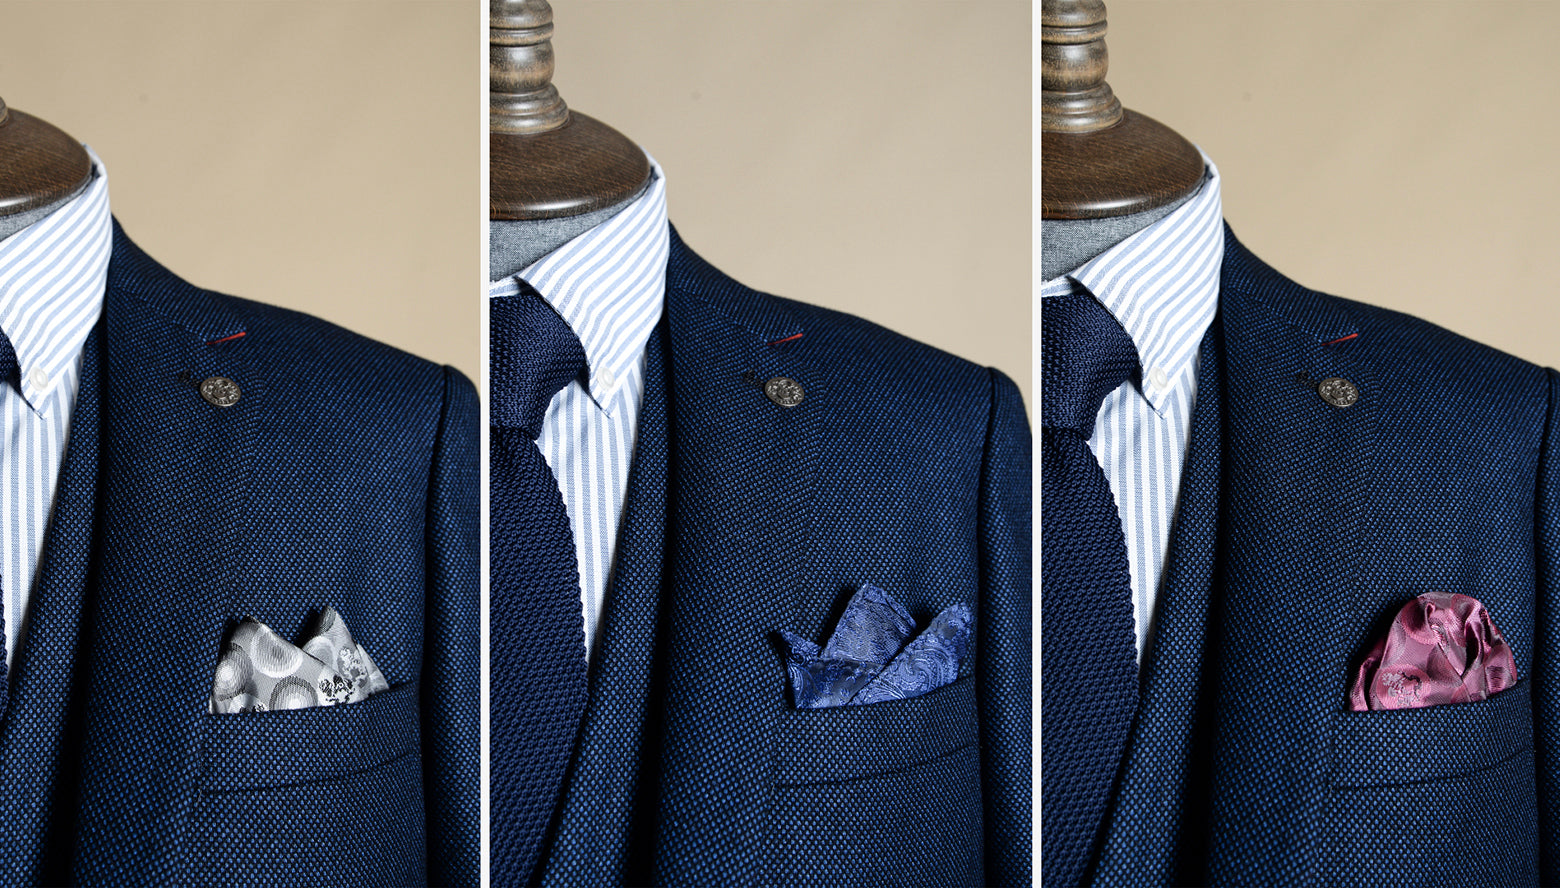 Can You Wear a Pocket Square Without a Tie? Pocket Square Guide